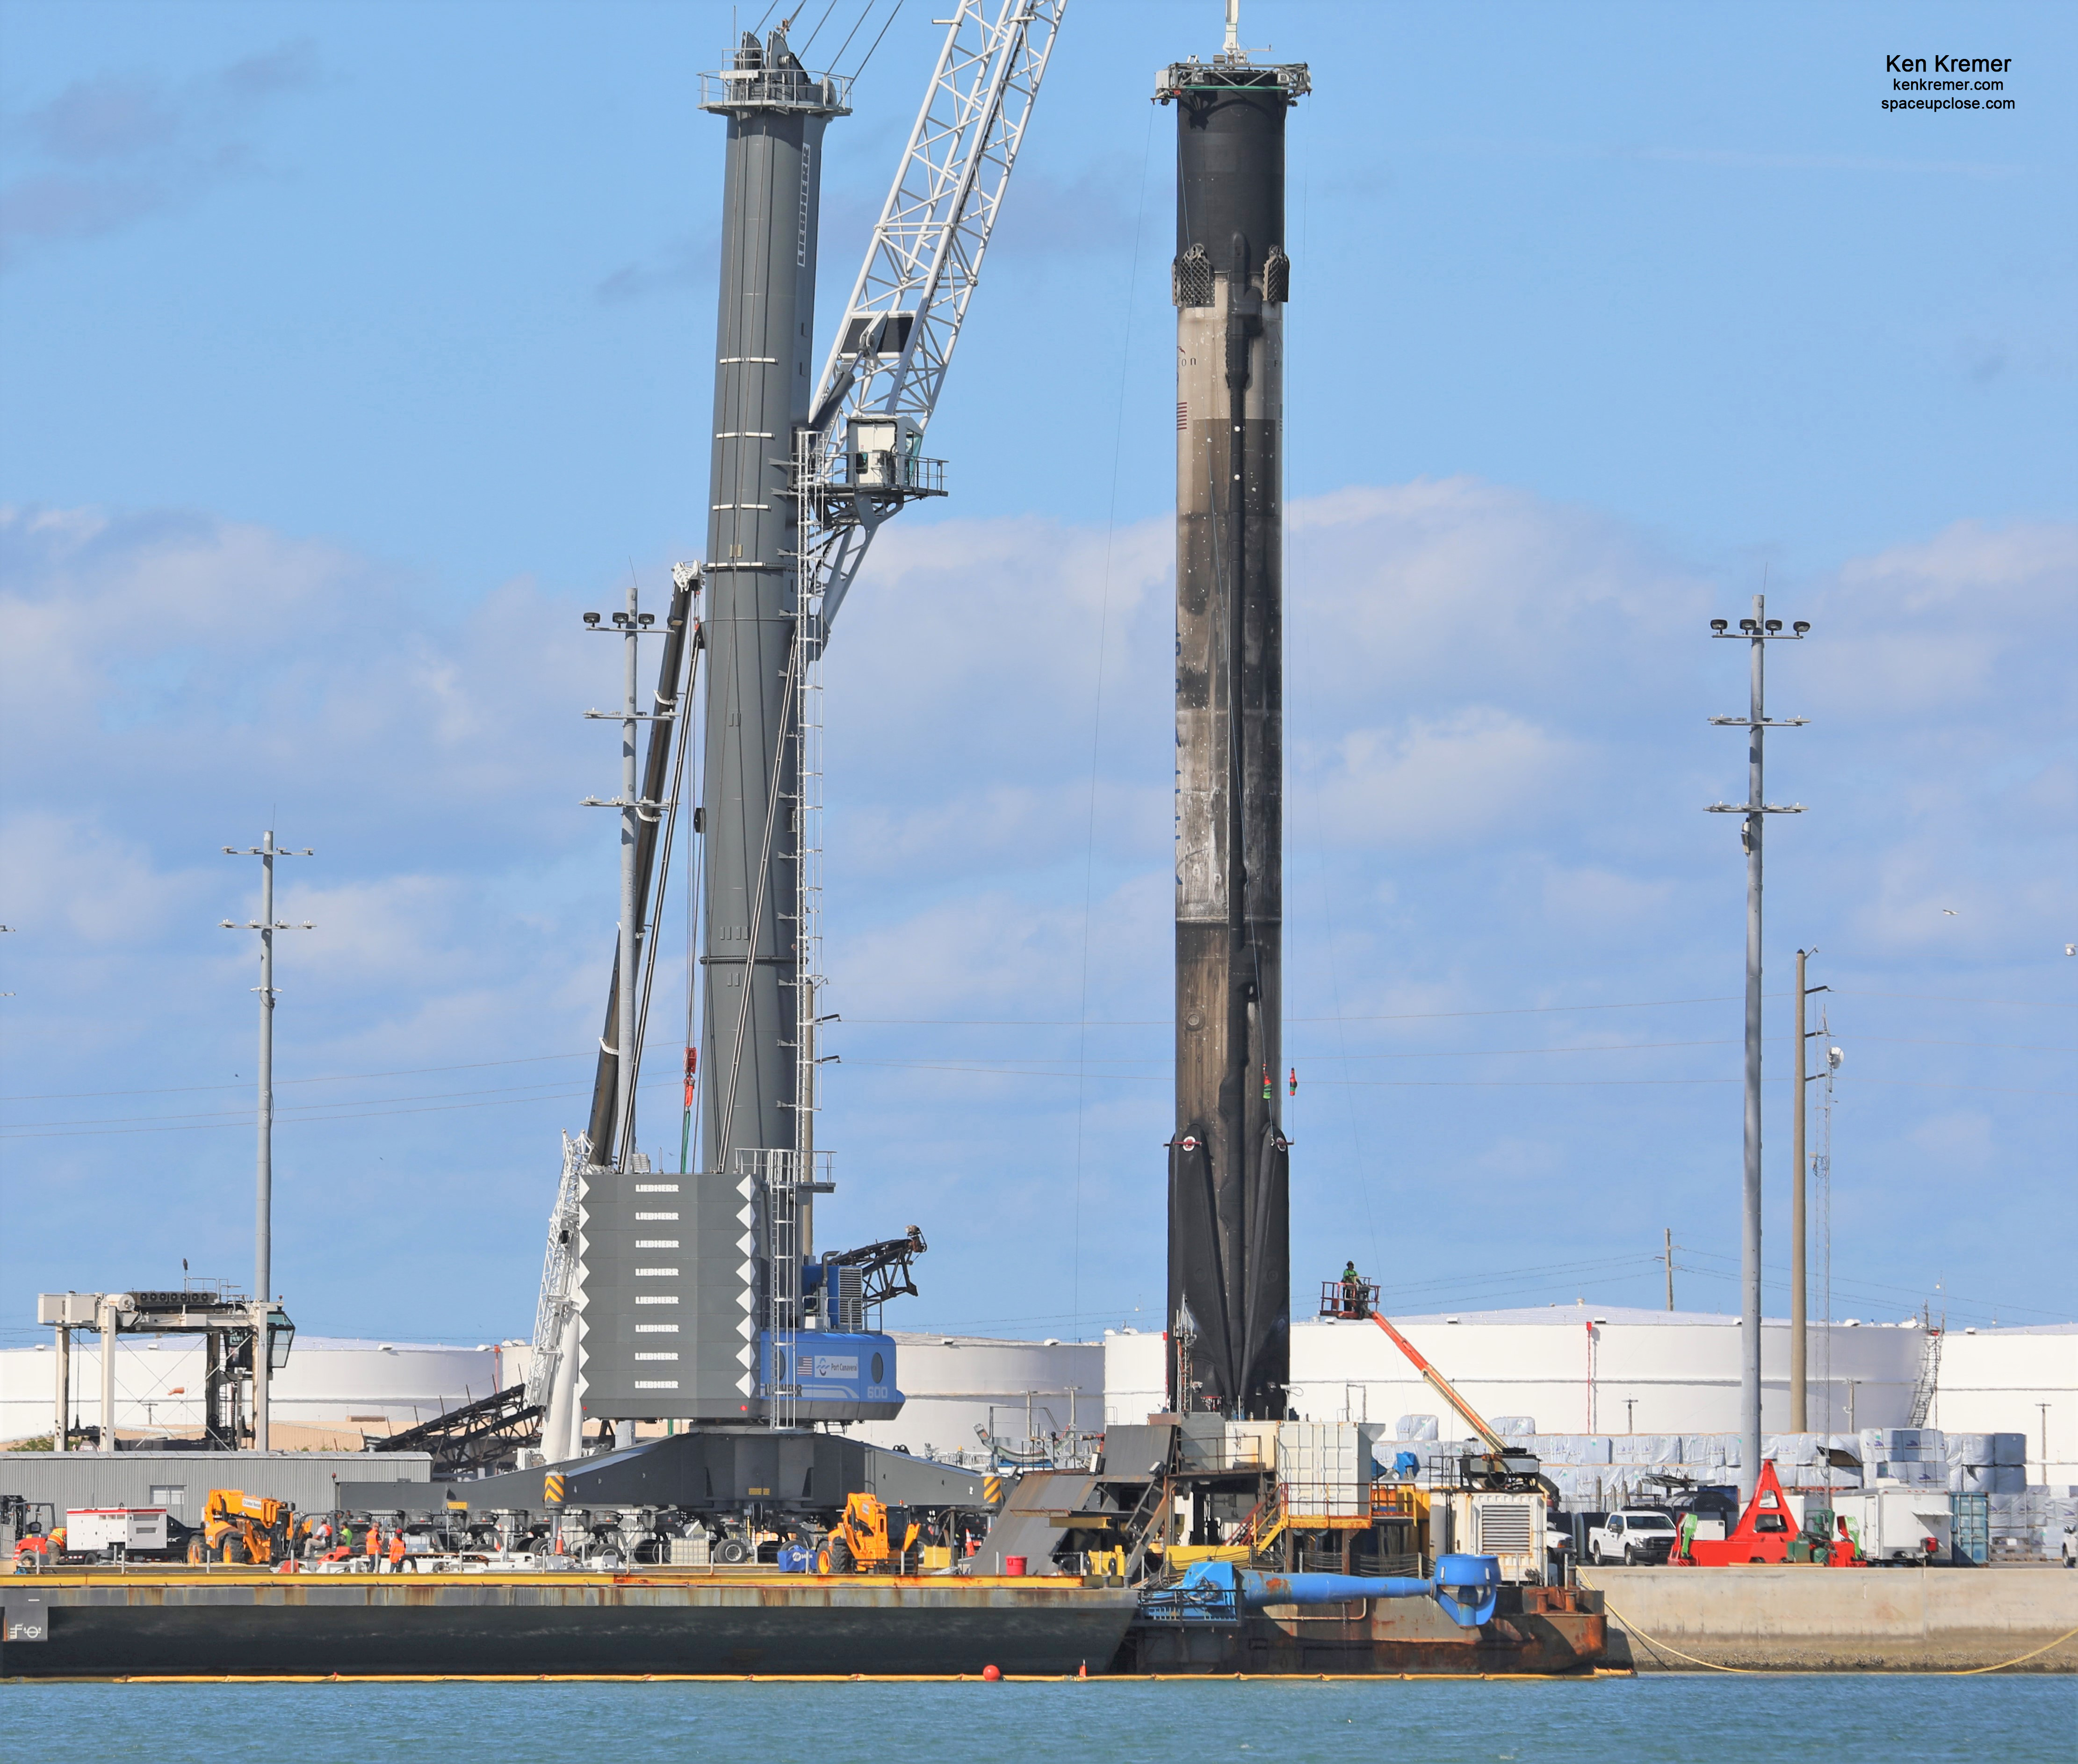 SpaceX Retracts All 4 Recycled Falcon 9 Starlink Landing Legs for Cape Transport after Craning Off OCISLY Droneship: Photos